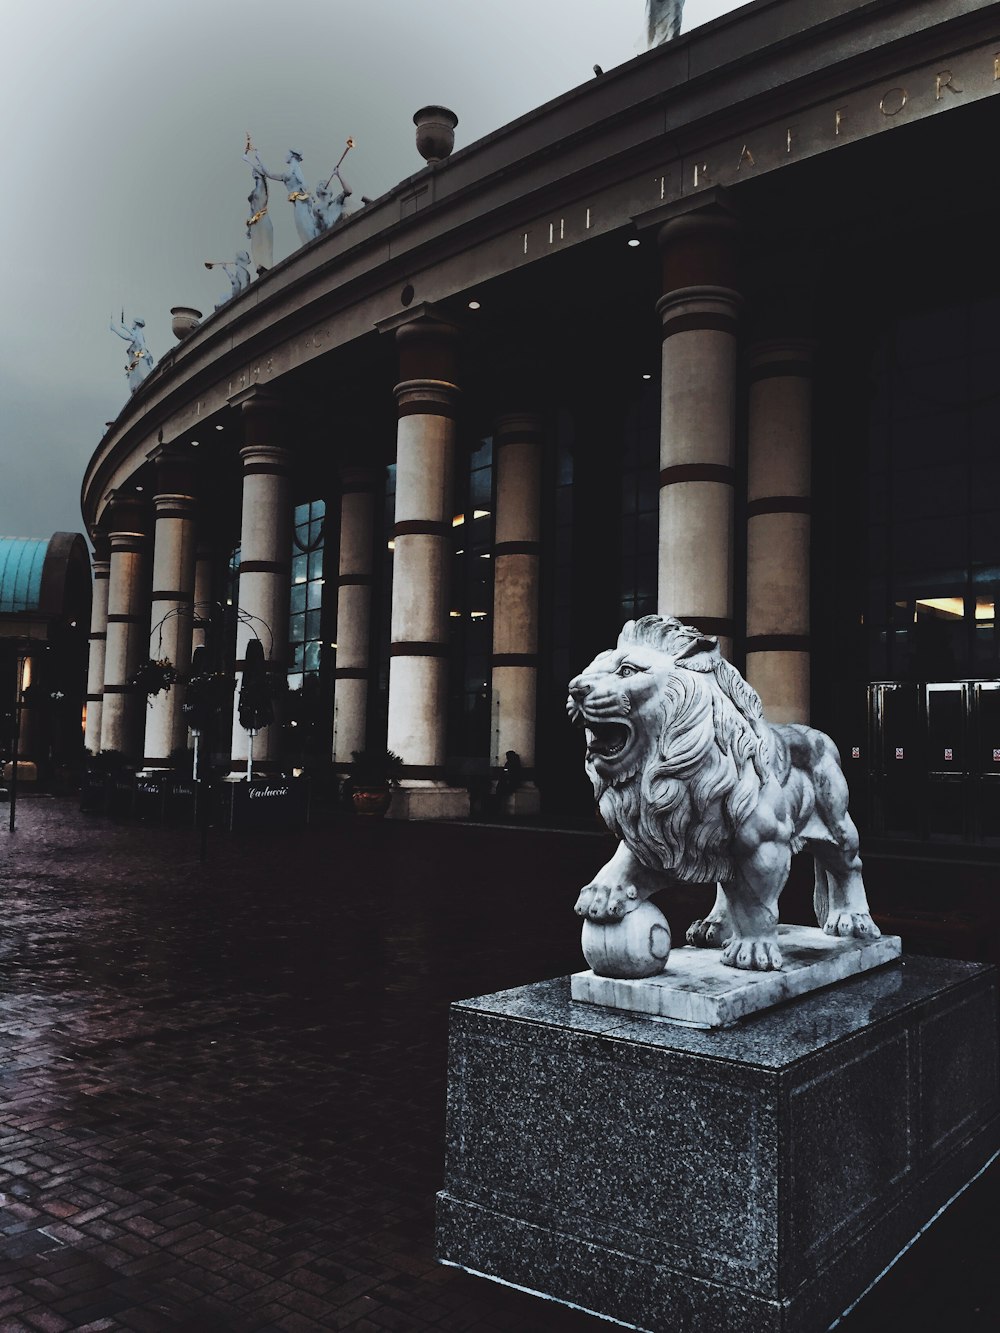 adult lion statue on concrete base in front of building with outdoor pillars